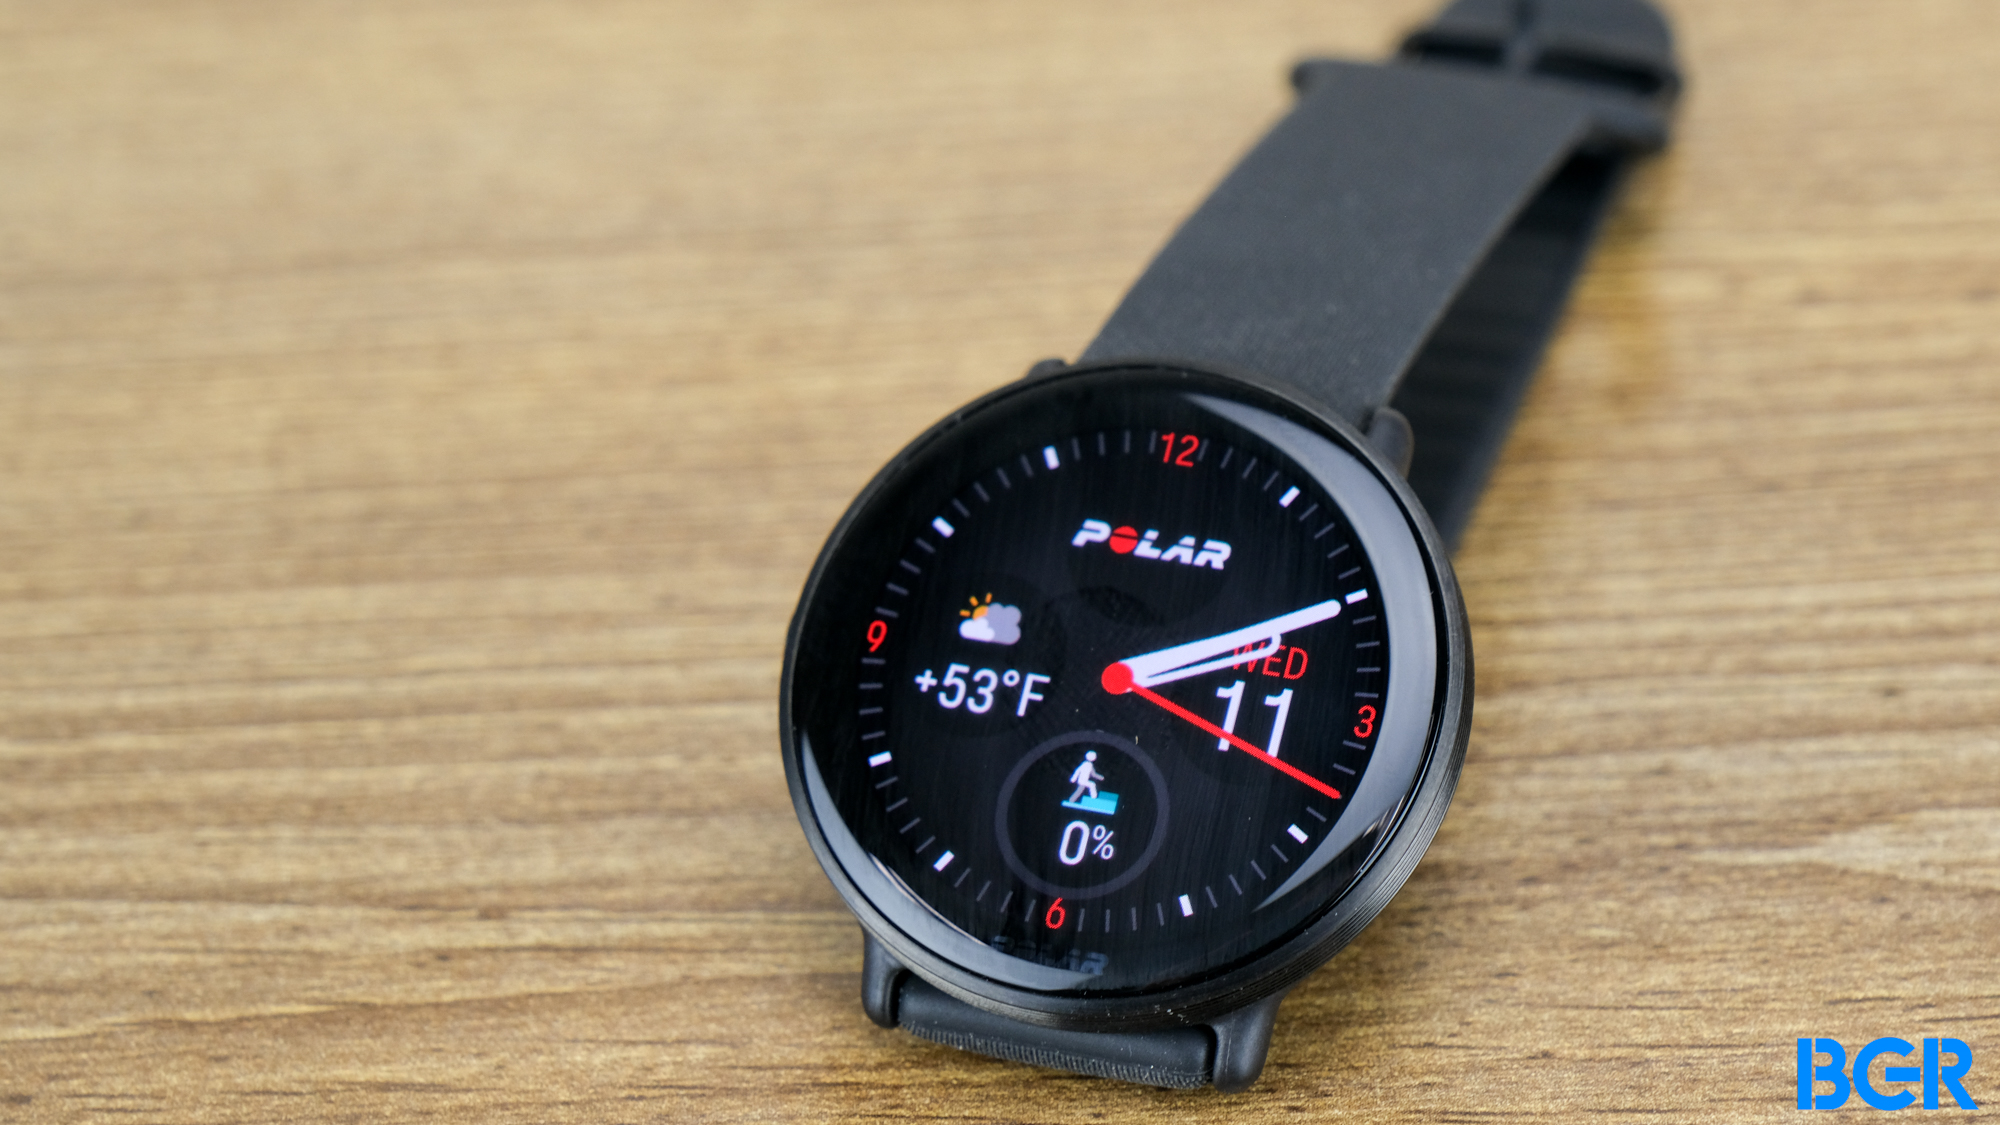 Polar Ignite 3 fitness watch review: Excellent battery, not great